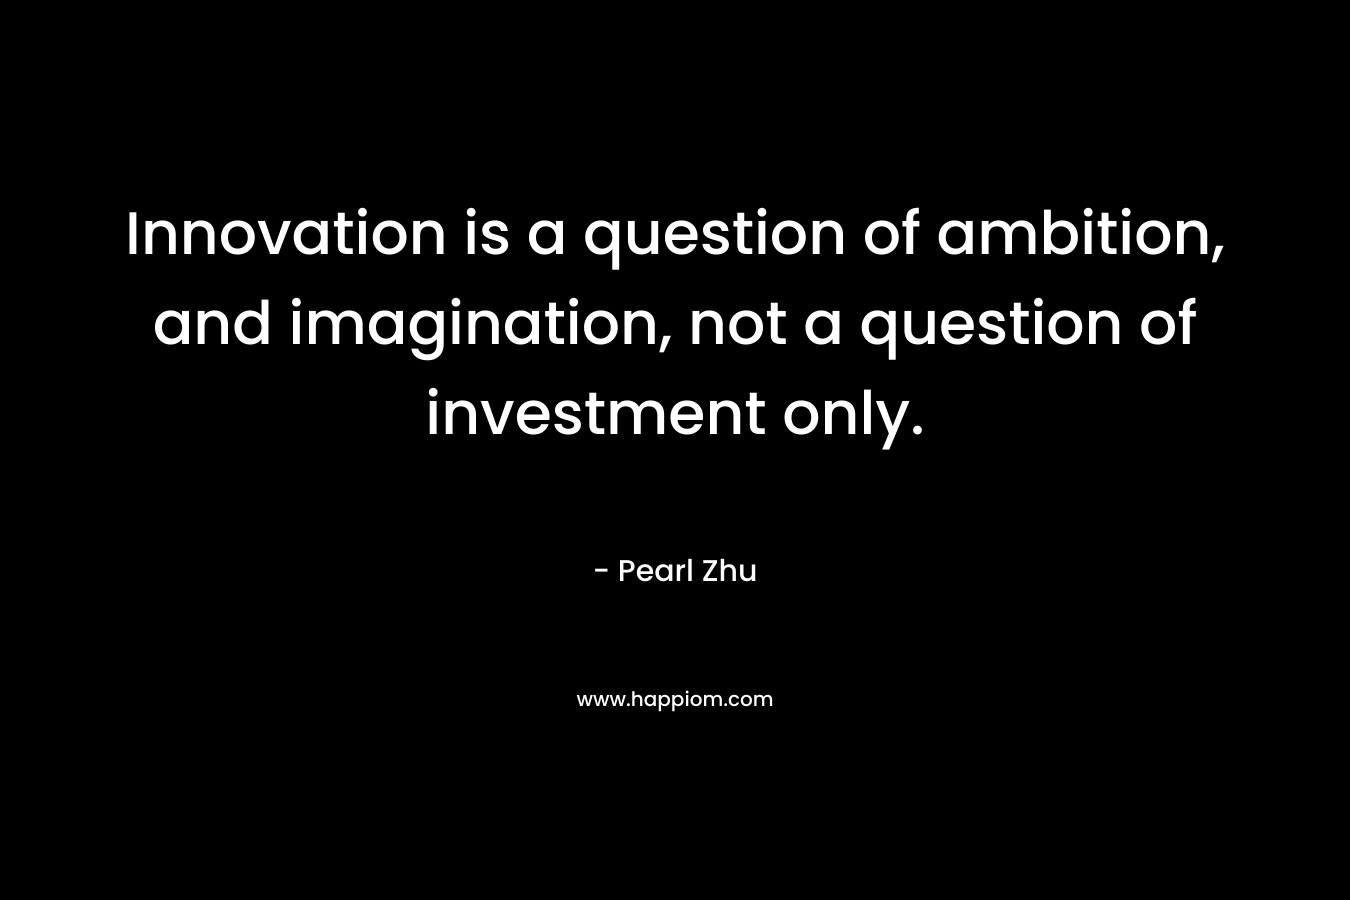 Innovation is a question of ambition, and imagination, not a question of investment only.